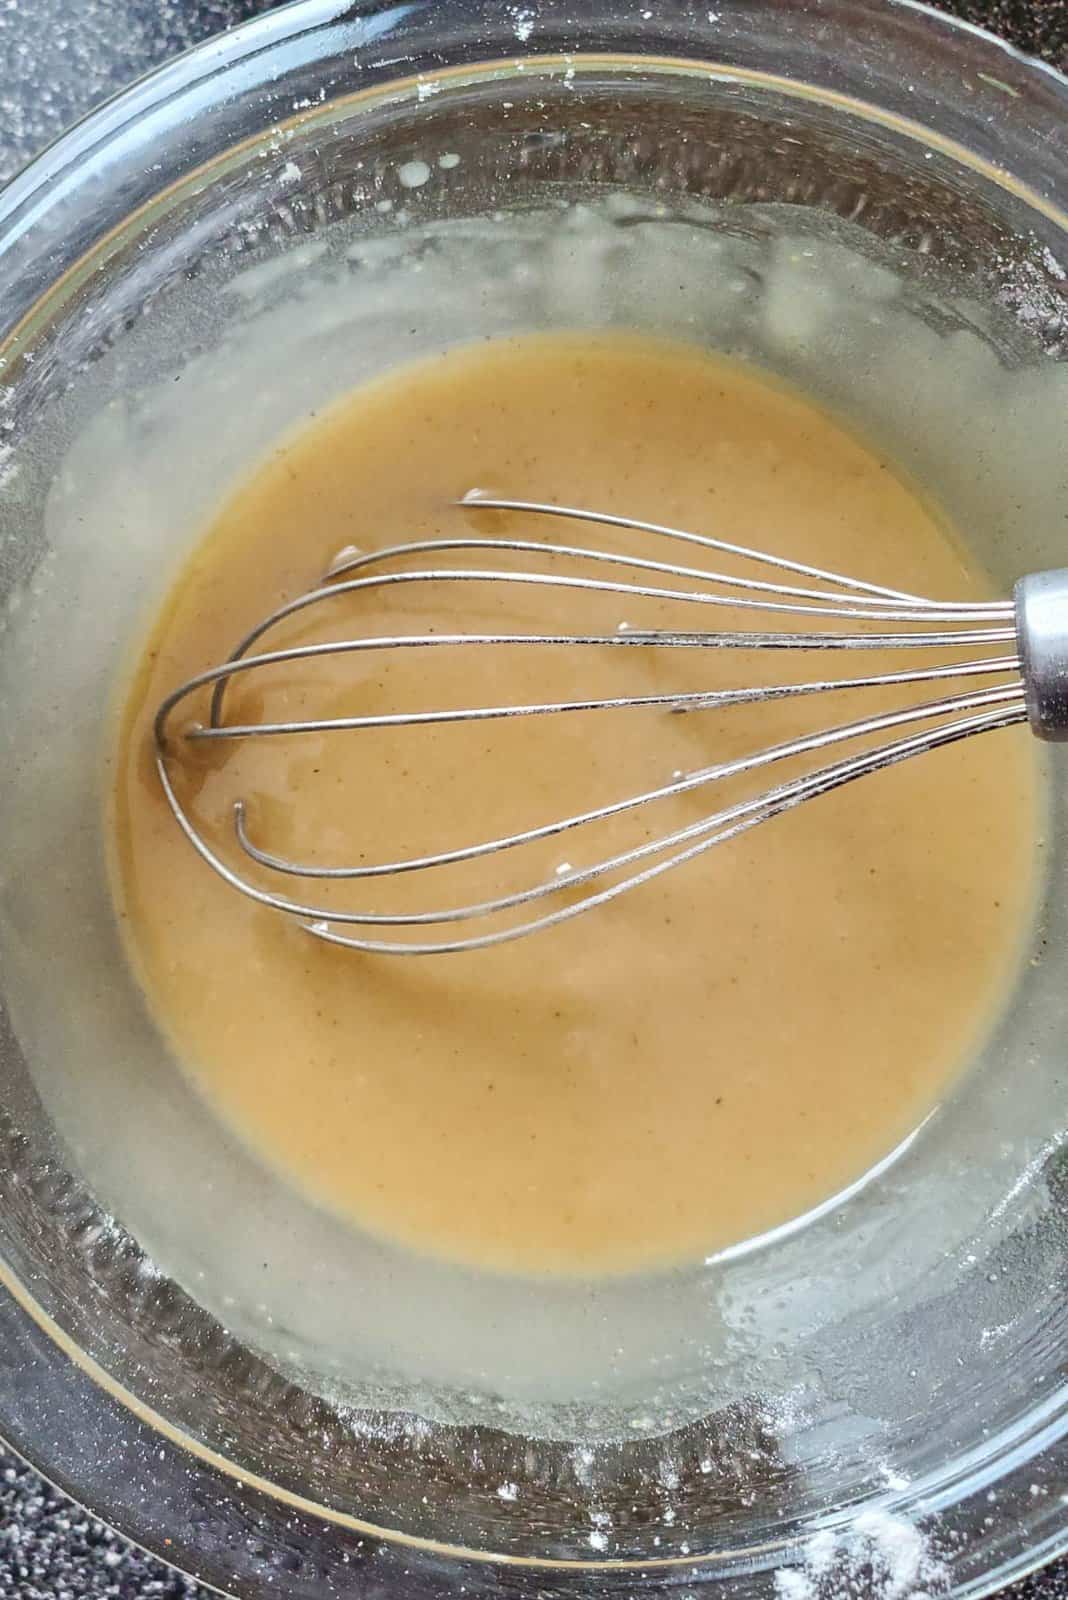 A close up of a light brown paste, that is the oil and flour paste, with a whisk still in the paste.